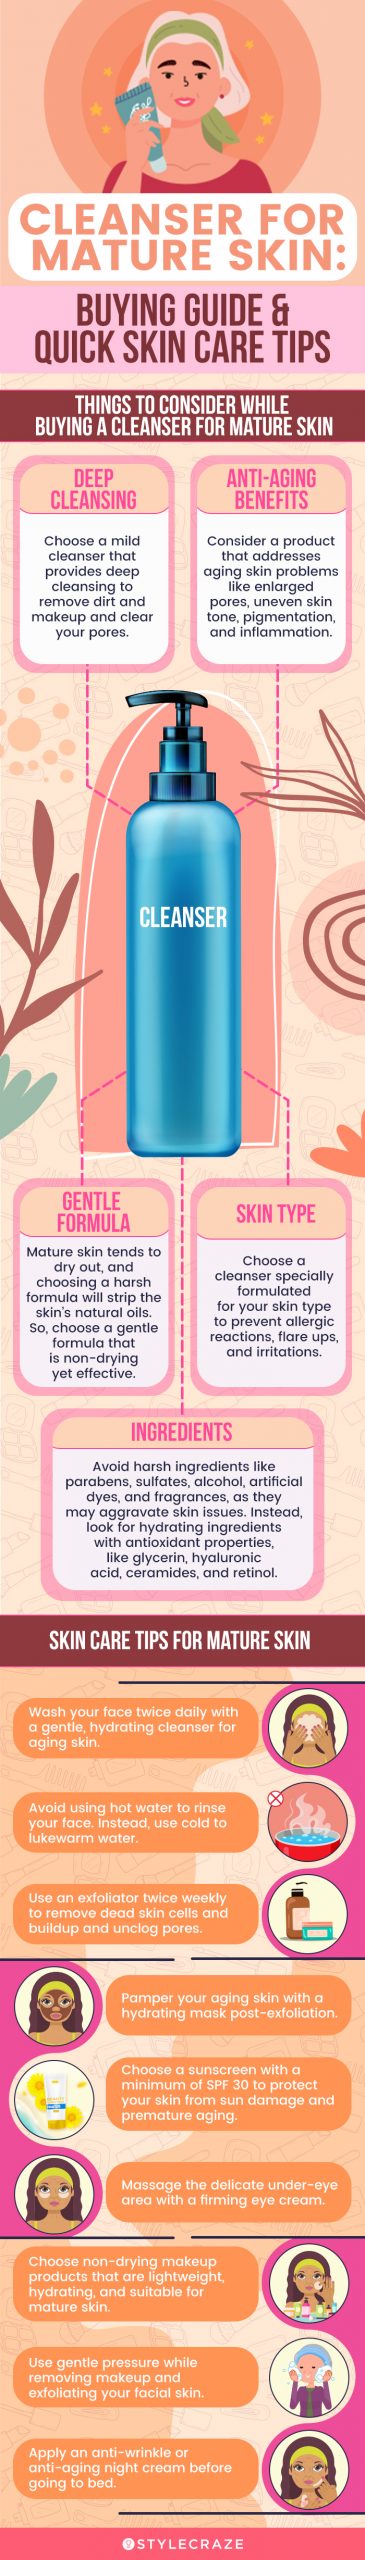 Cleanser For Mature Skin: Buying Guide (infographic)